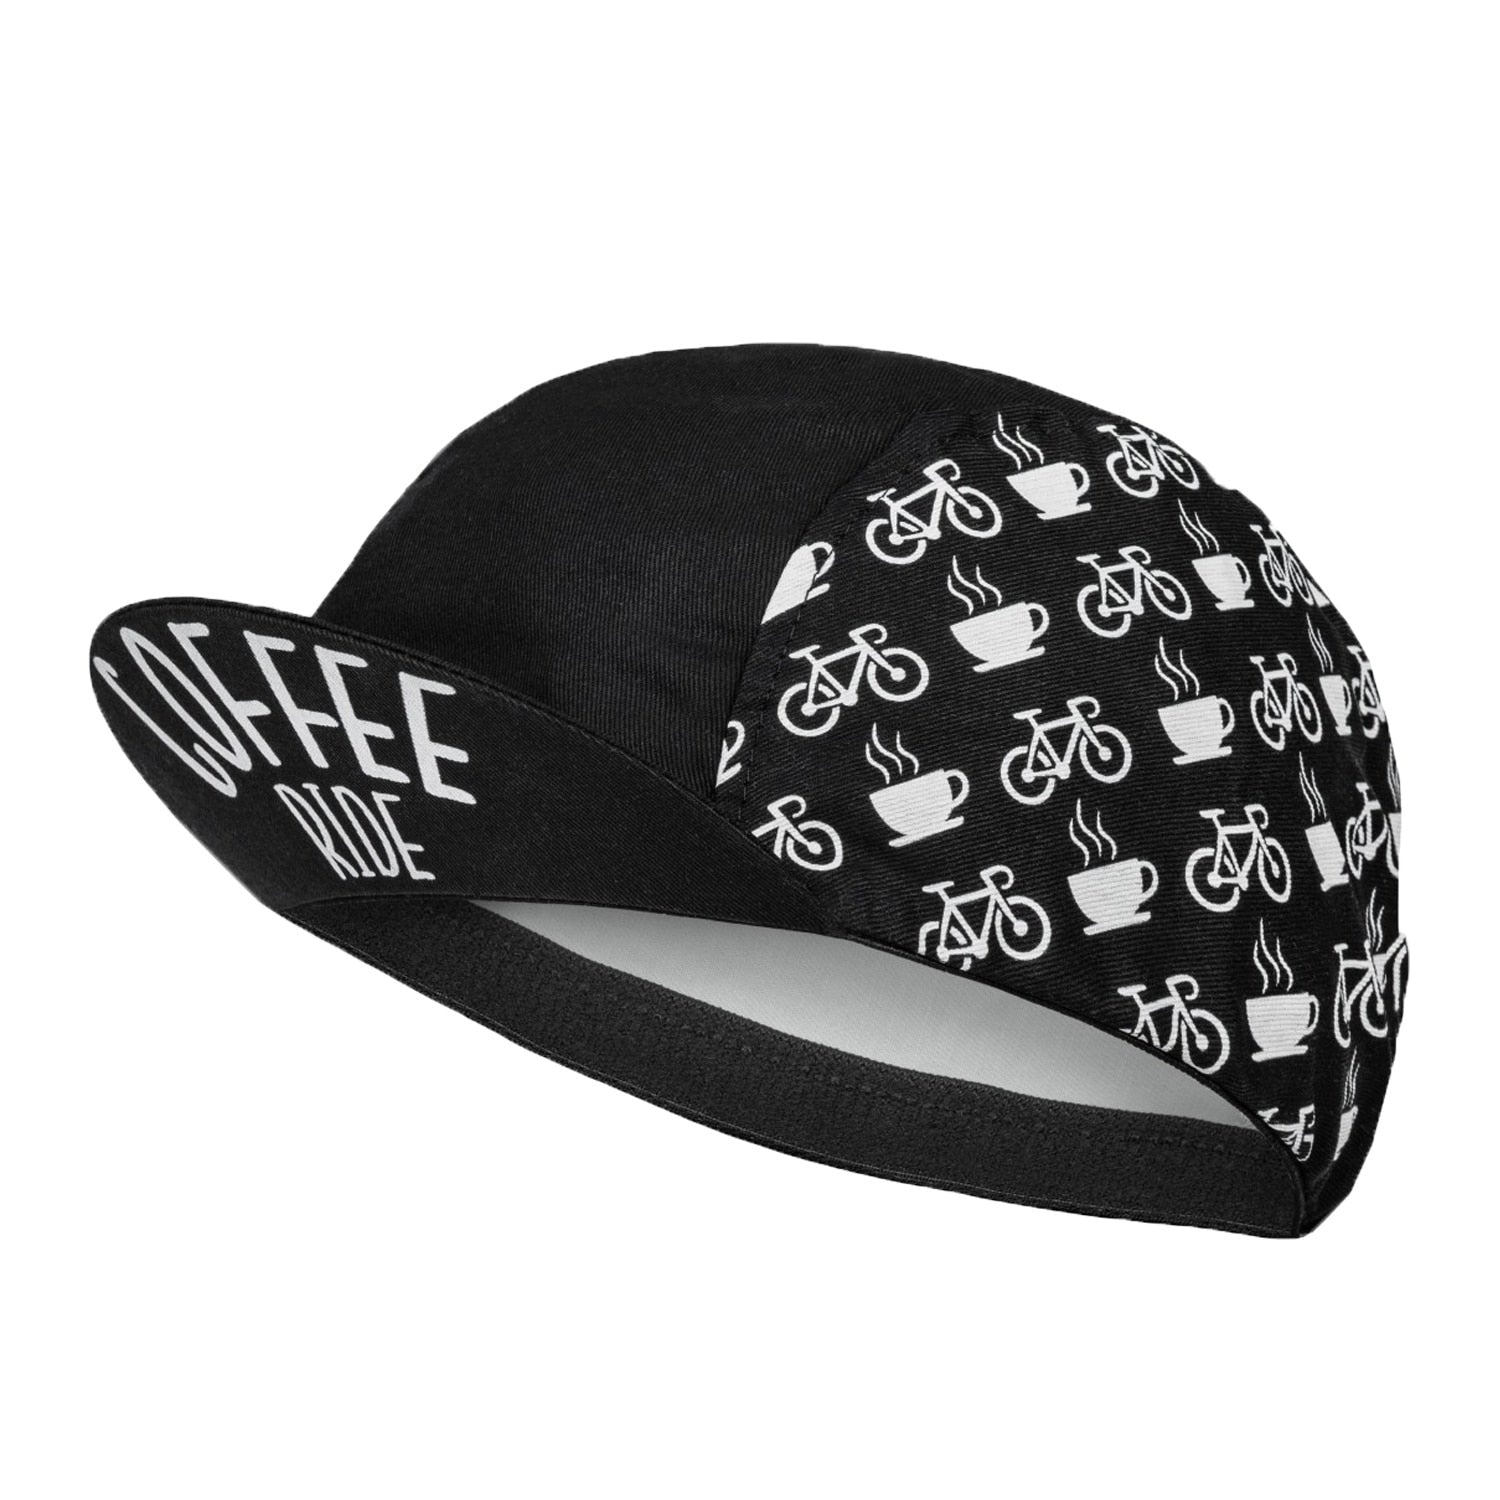 Classic Retro Coffee Ride Bike Polyester Cycling Caps Black White Quick Drying Breathable Summer Bicycle Balaclava Cool